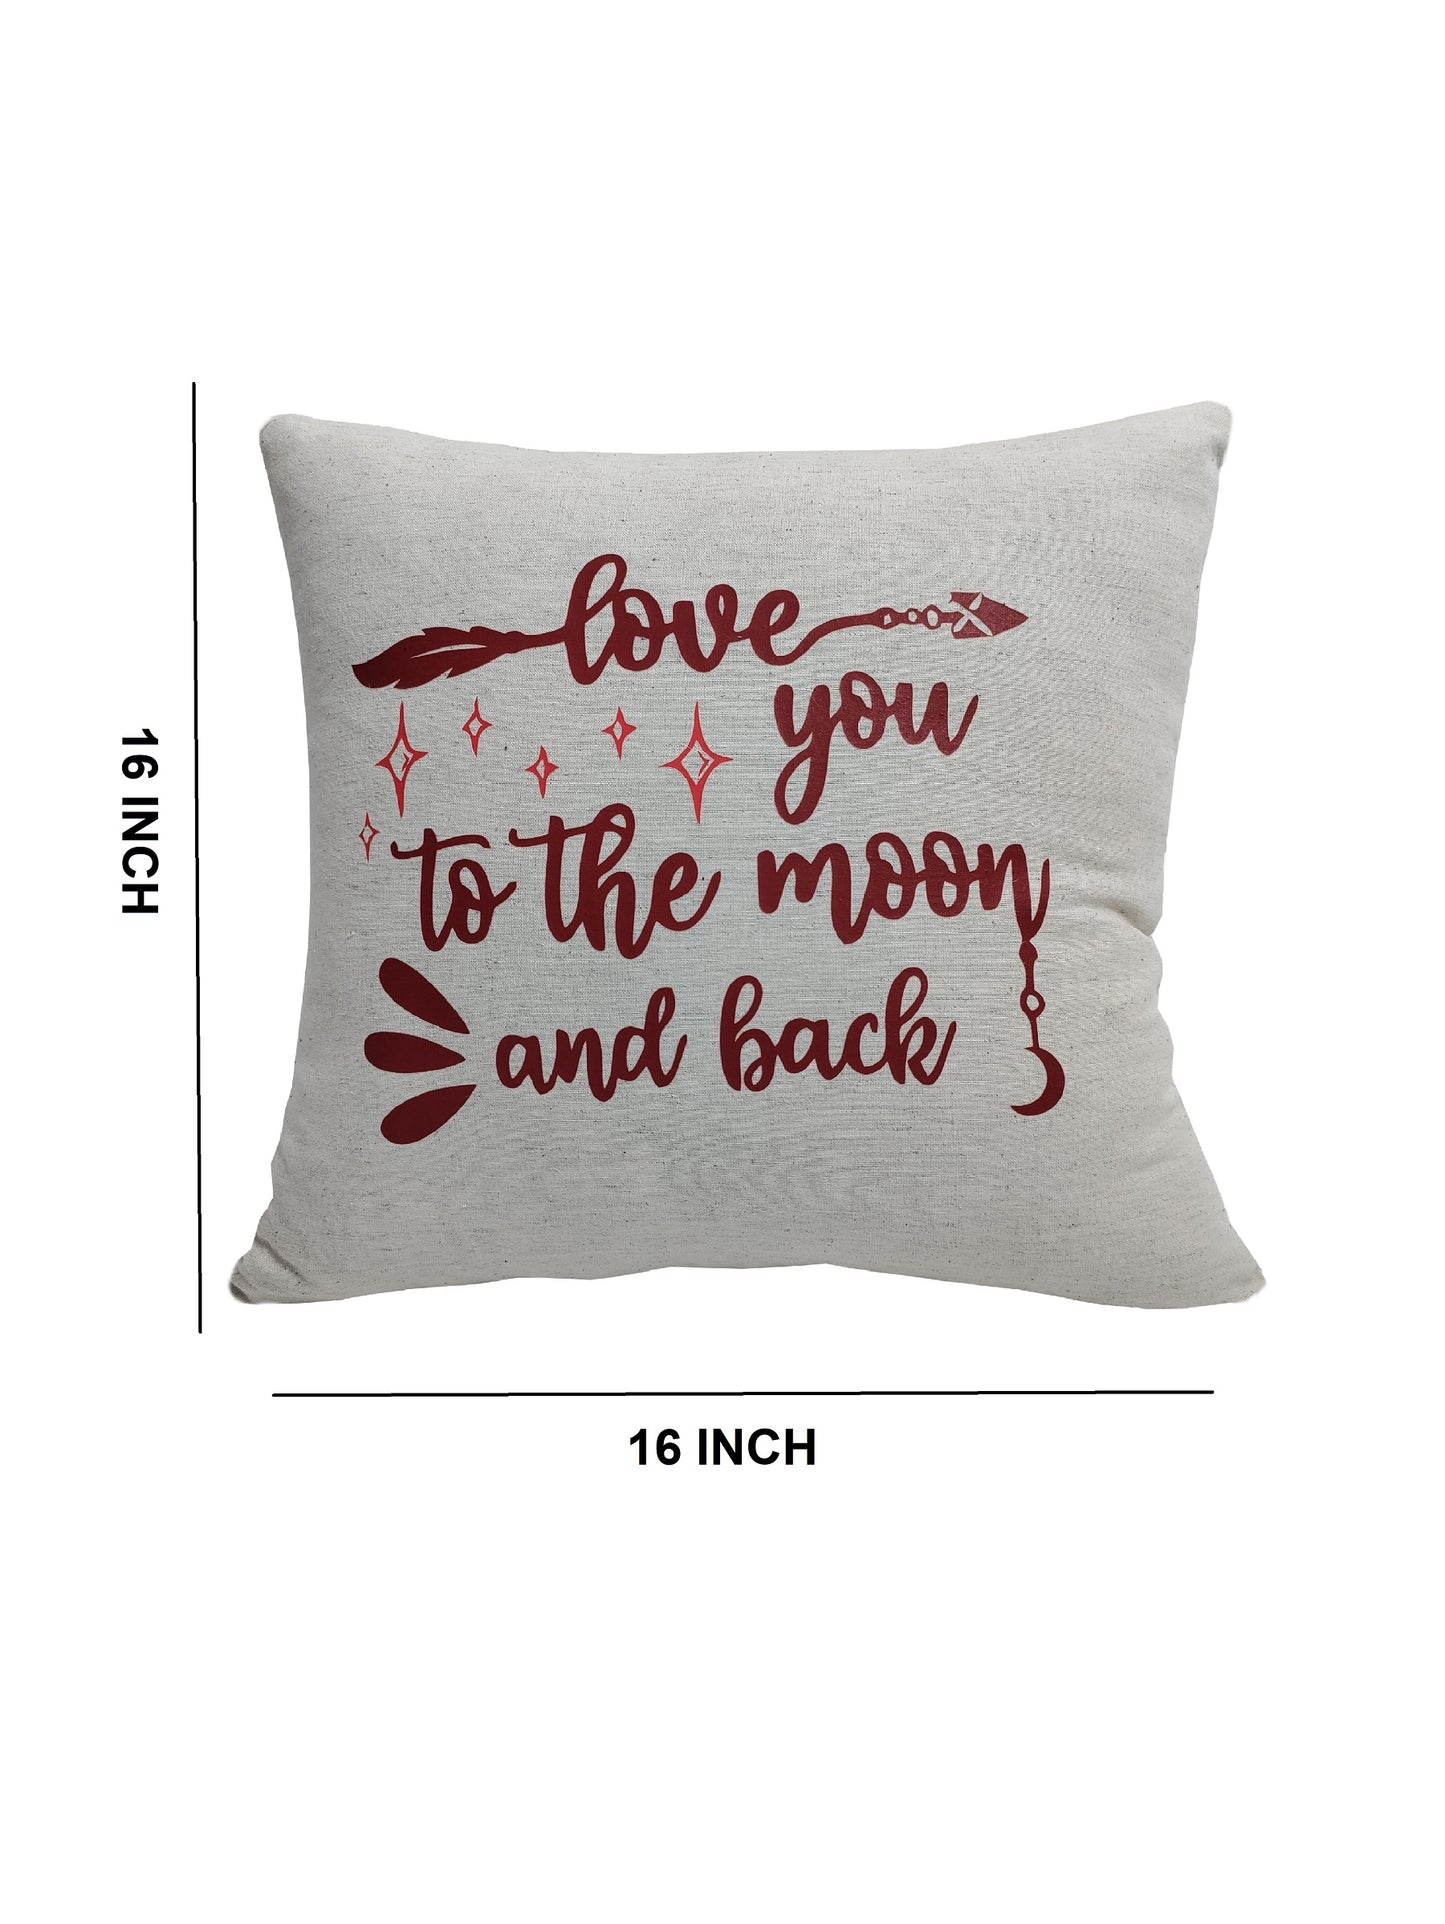 Valentine's Day Cotton Printed Cushion | Printed Cushion Gift | Valentine Gift for Boyfriend Girlfriend | Couples Gift for Him / Her |16x16 Inch_Beige3